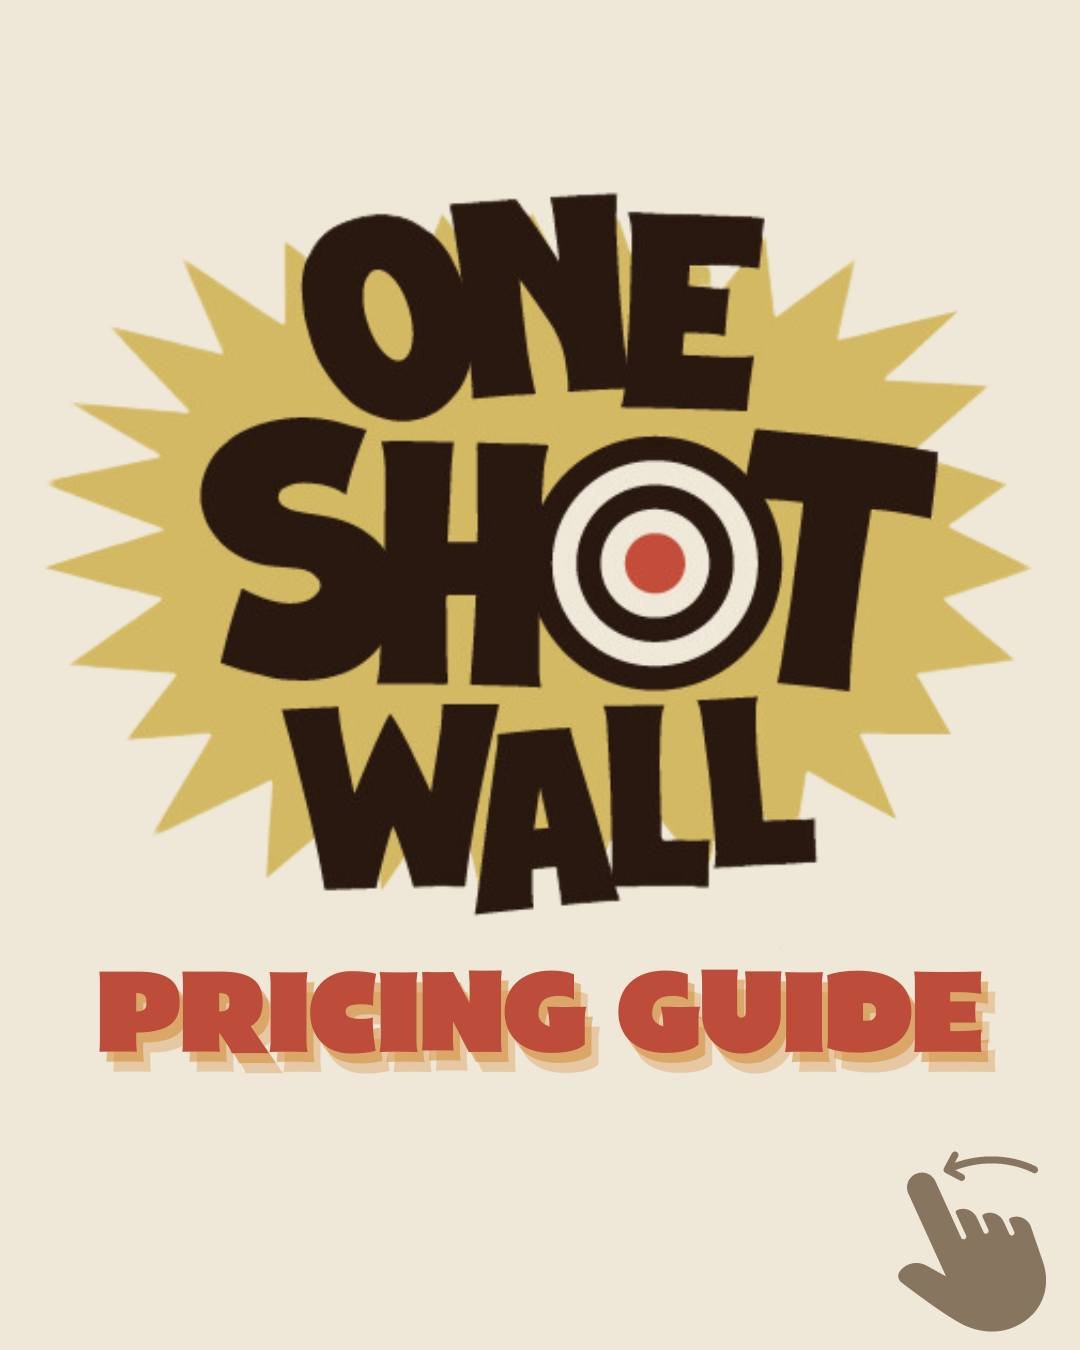 Curious about booking a tattoo at our One Shot Wall Art Show &amp; Raffle? Planning your tattoo budget? 💰

This time, we're offering an even wider range of sizes and prices! Small OSW designs start at $150, medium designs range from $500-750, and la